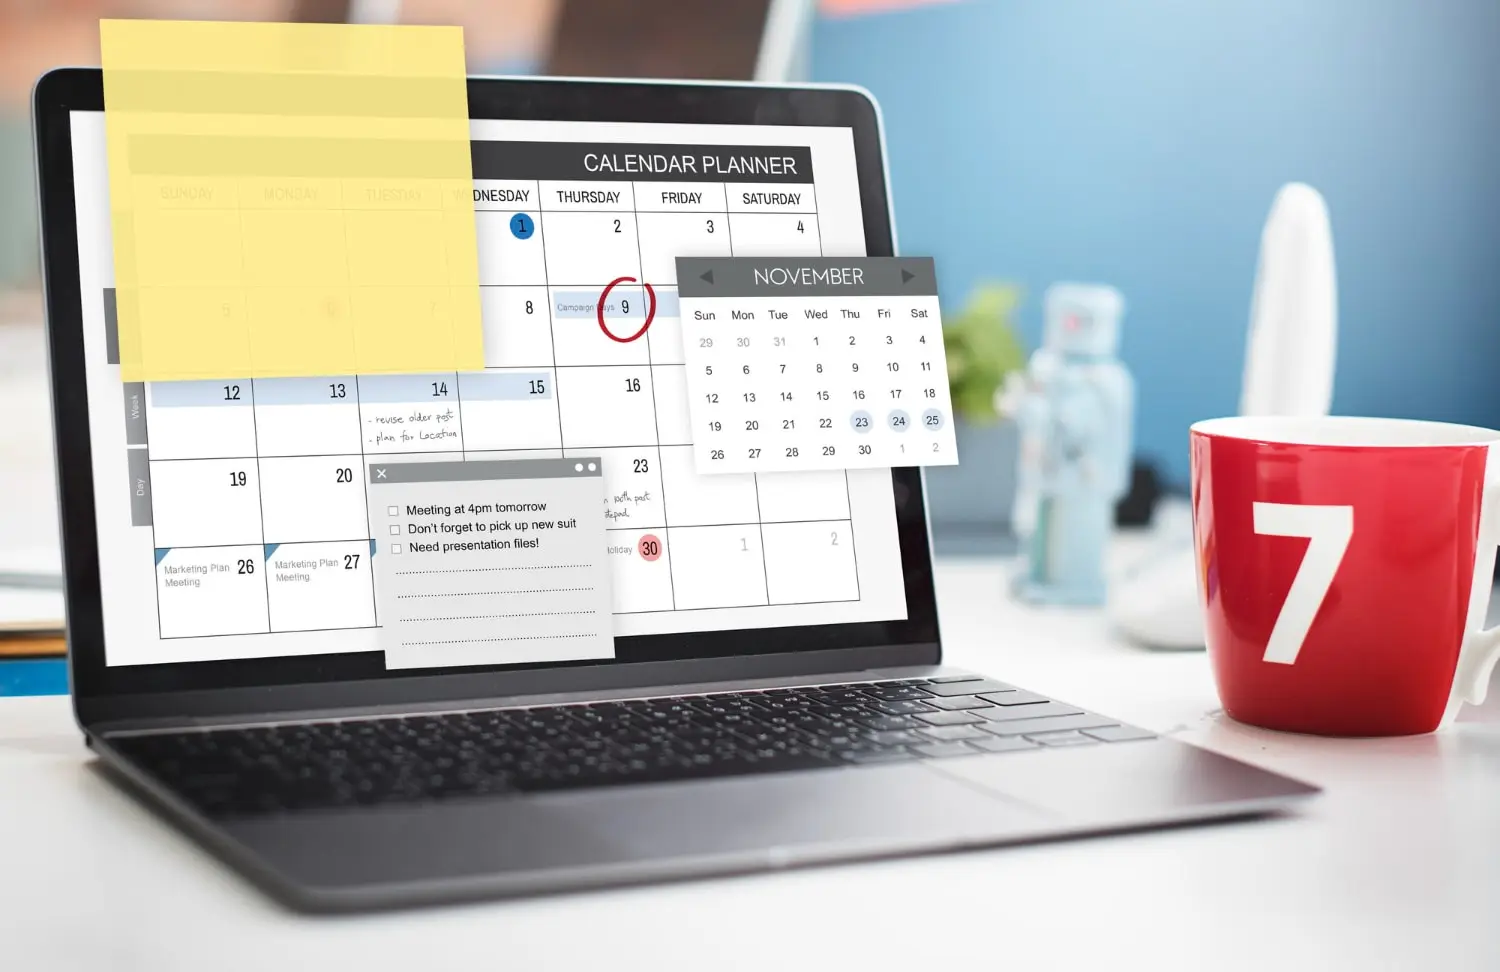 A reminder software displayed on the laptop screen on the table with a red mug next to it with 7 number on it